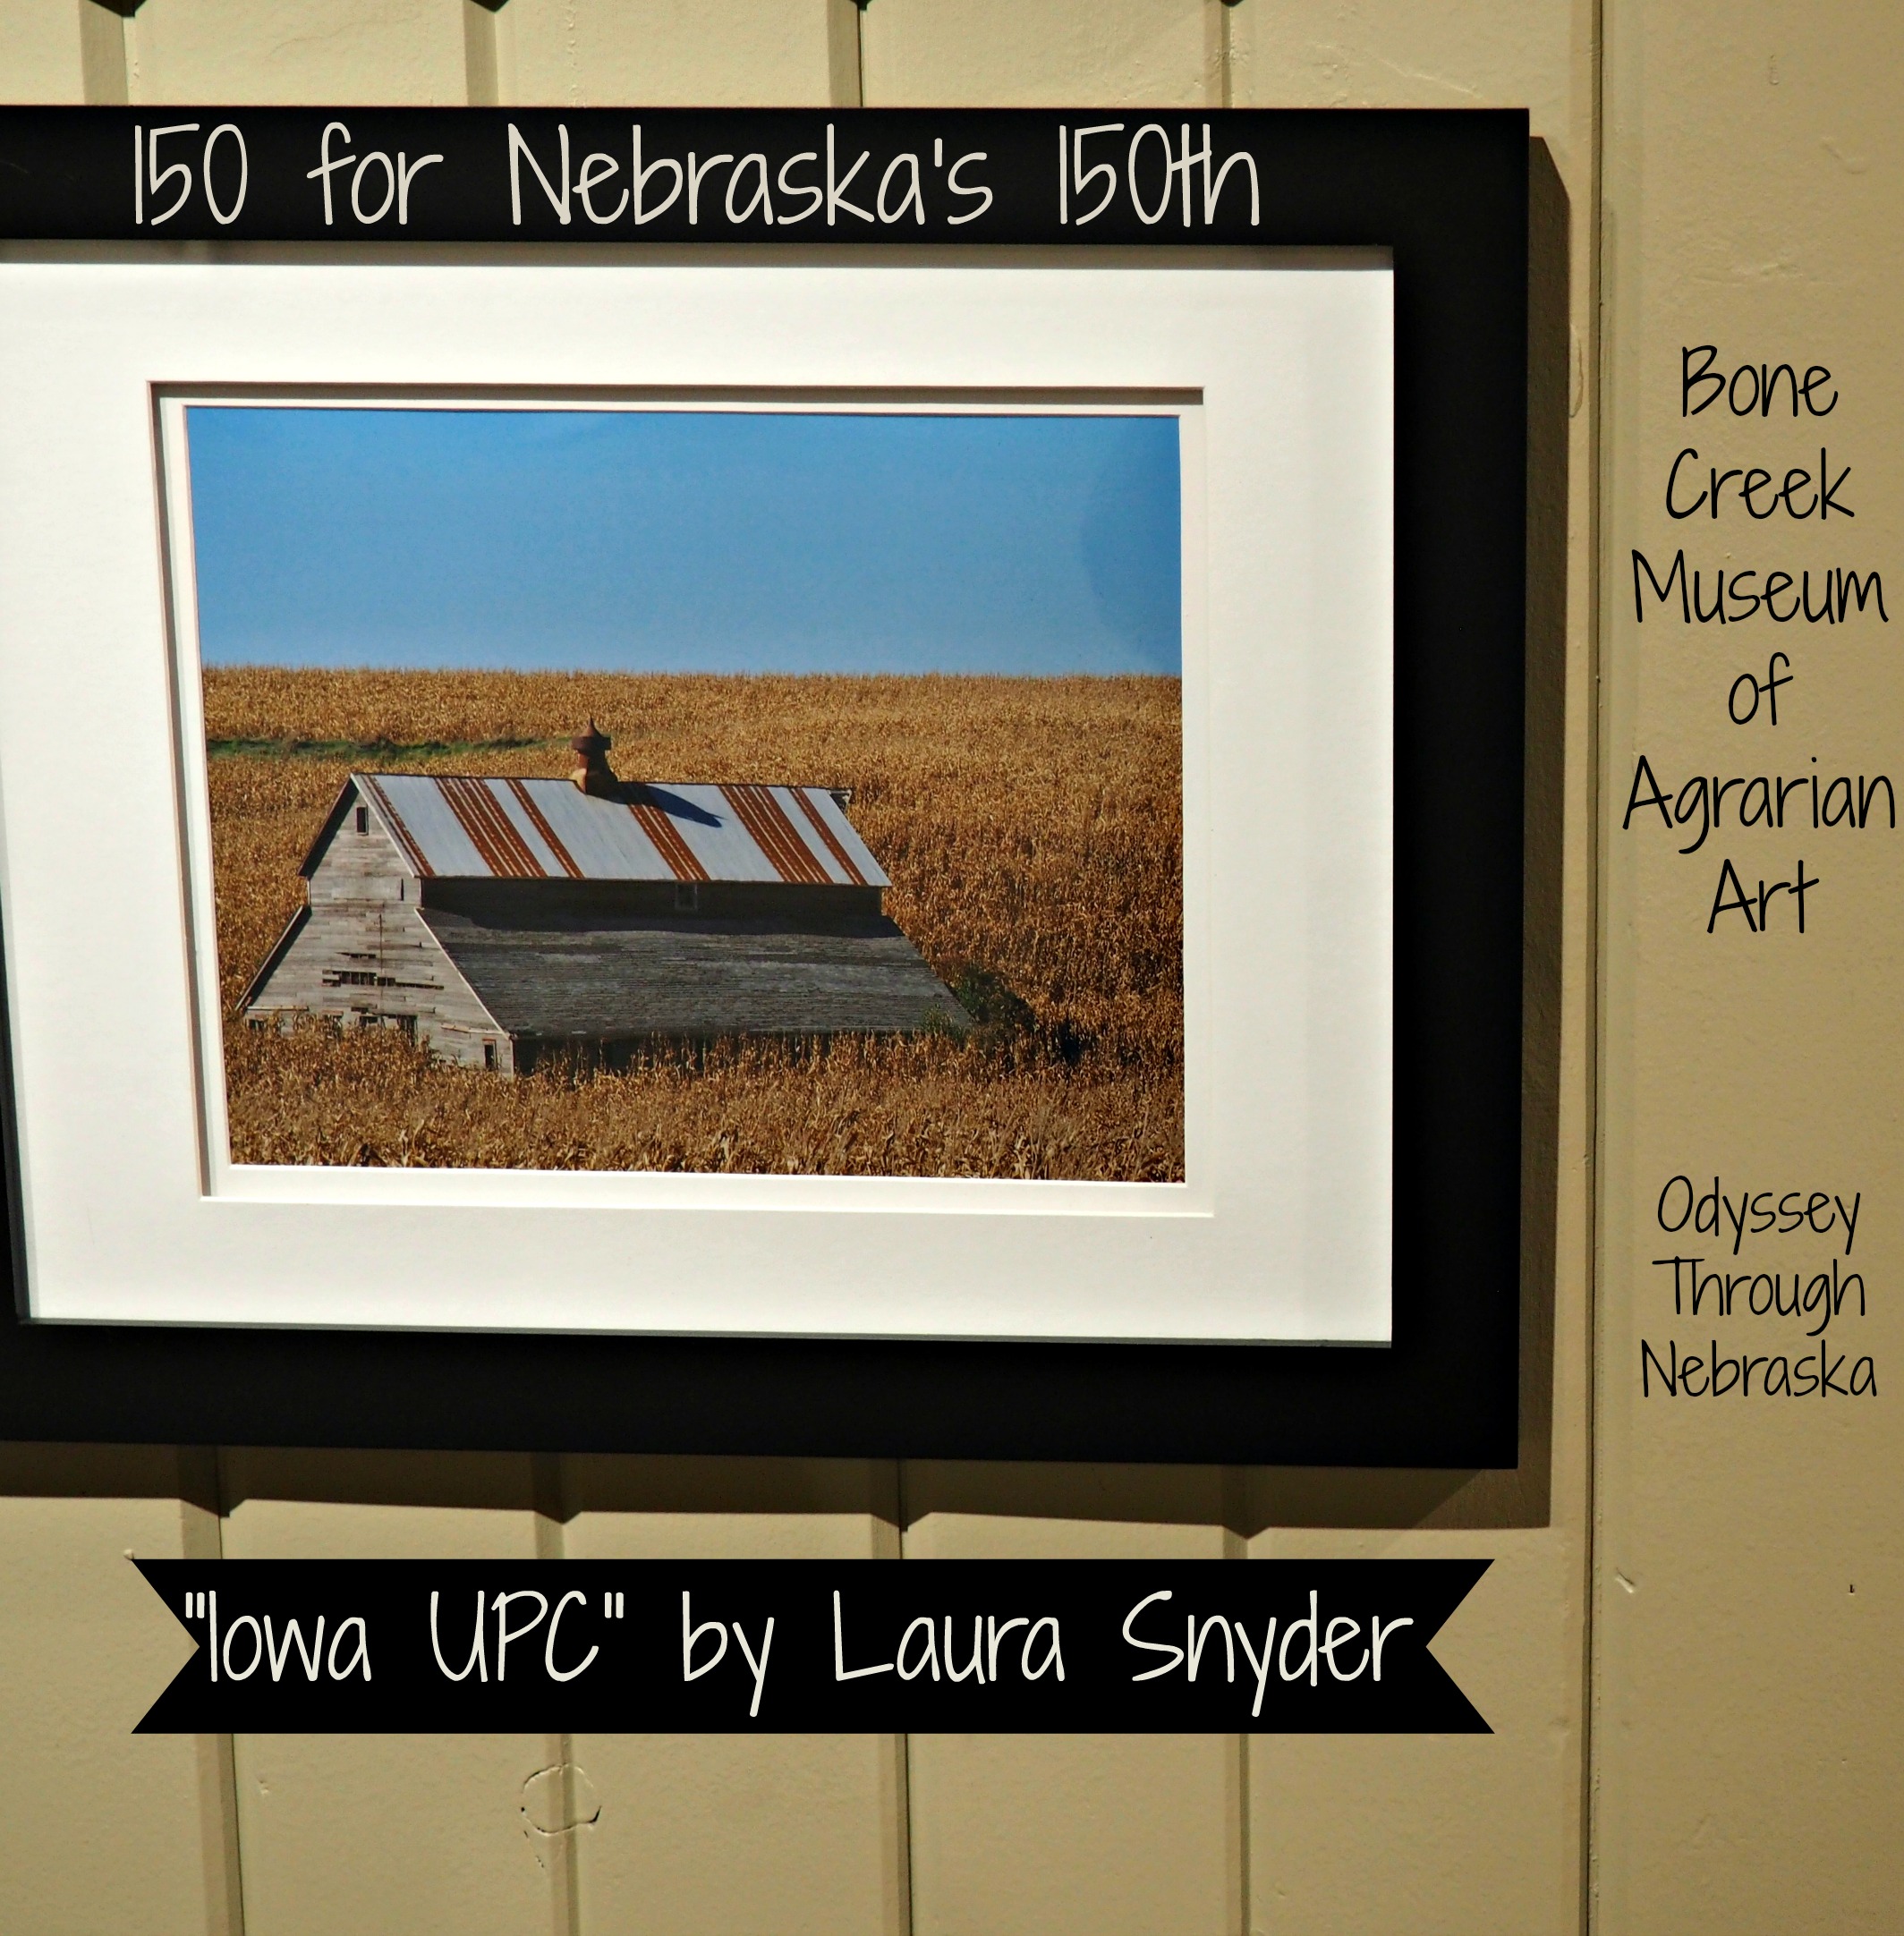 Photographer Laura Snyder picture for 150 for Nebraska's 150th at Bone Creek Museum of Agrarian Art